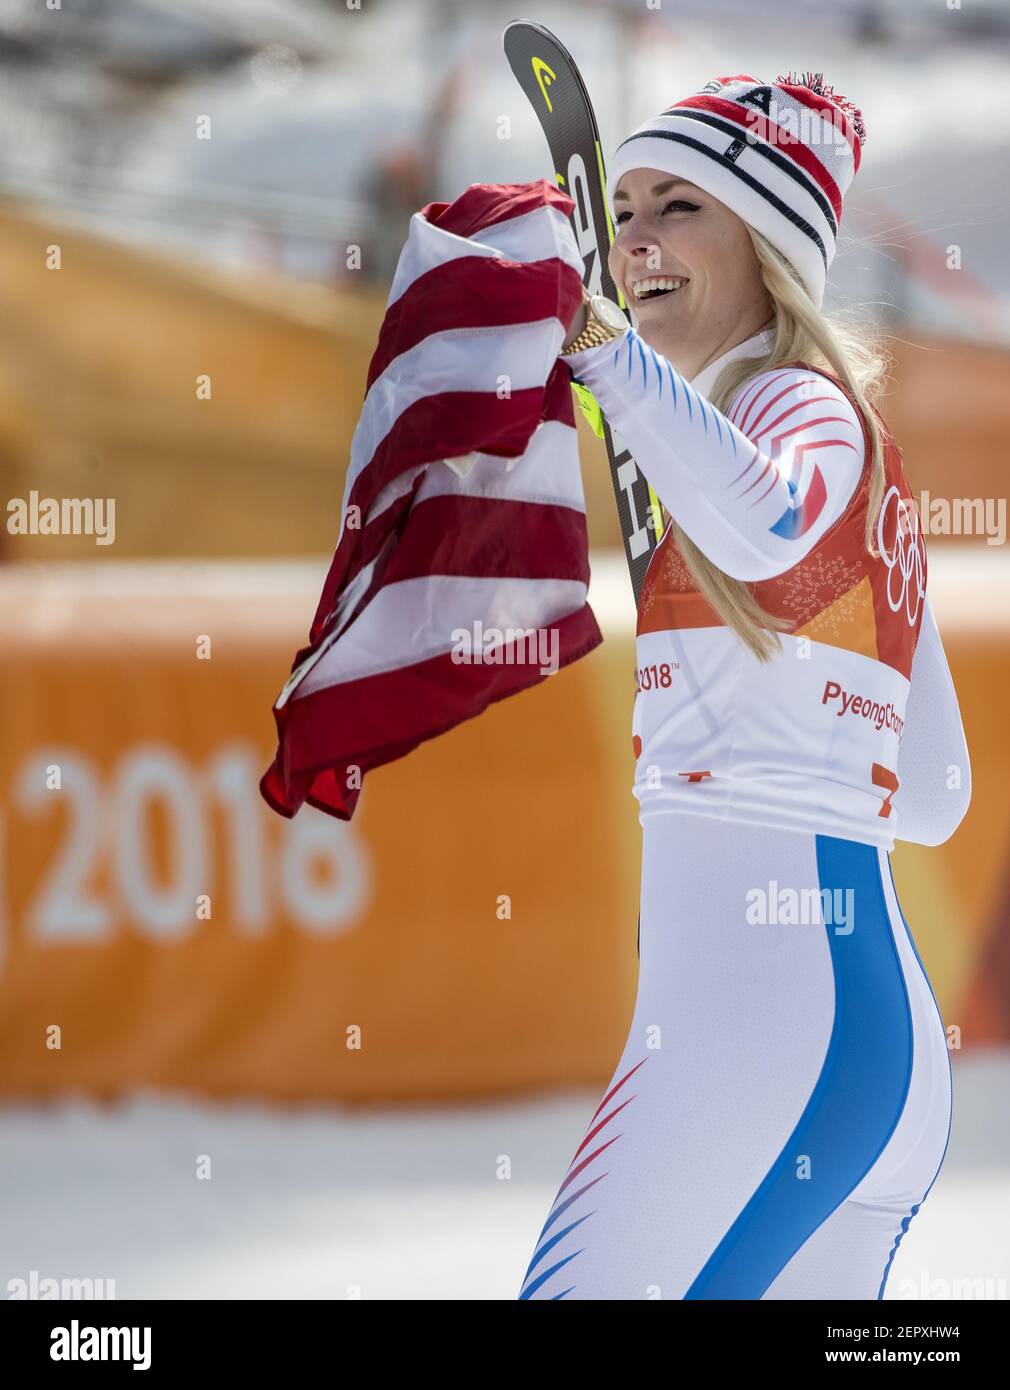 Lindsey Vonn of the USA celebrates winning the bronze medal in Women's Downhill at the Jeongseon Alpine Centre in South Korea on Wednesday, Feb. 21, 2018, during the Pyeongchang Winter Olympics. (Photo by Carlos Gonzalez/Minneapolis Star Tribune/TNS/Sipa USA) Stock Photo